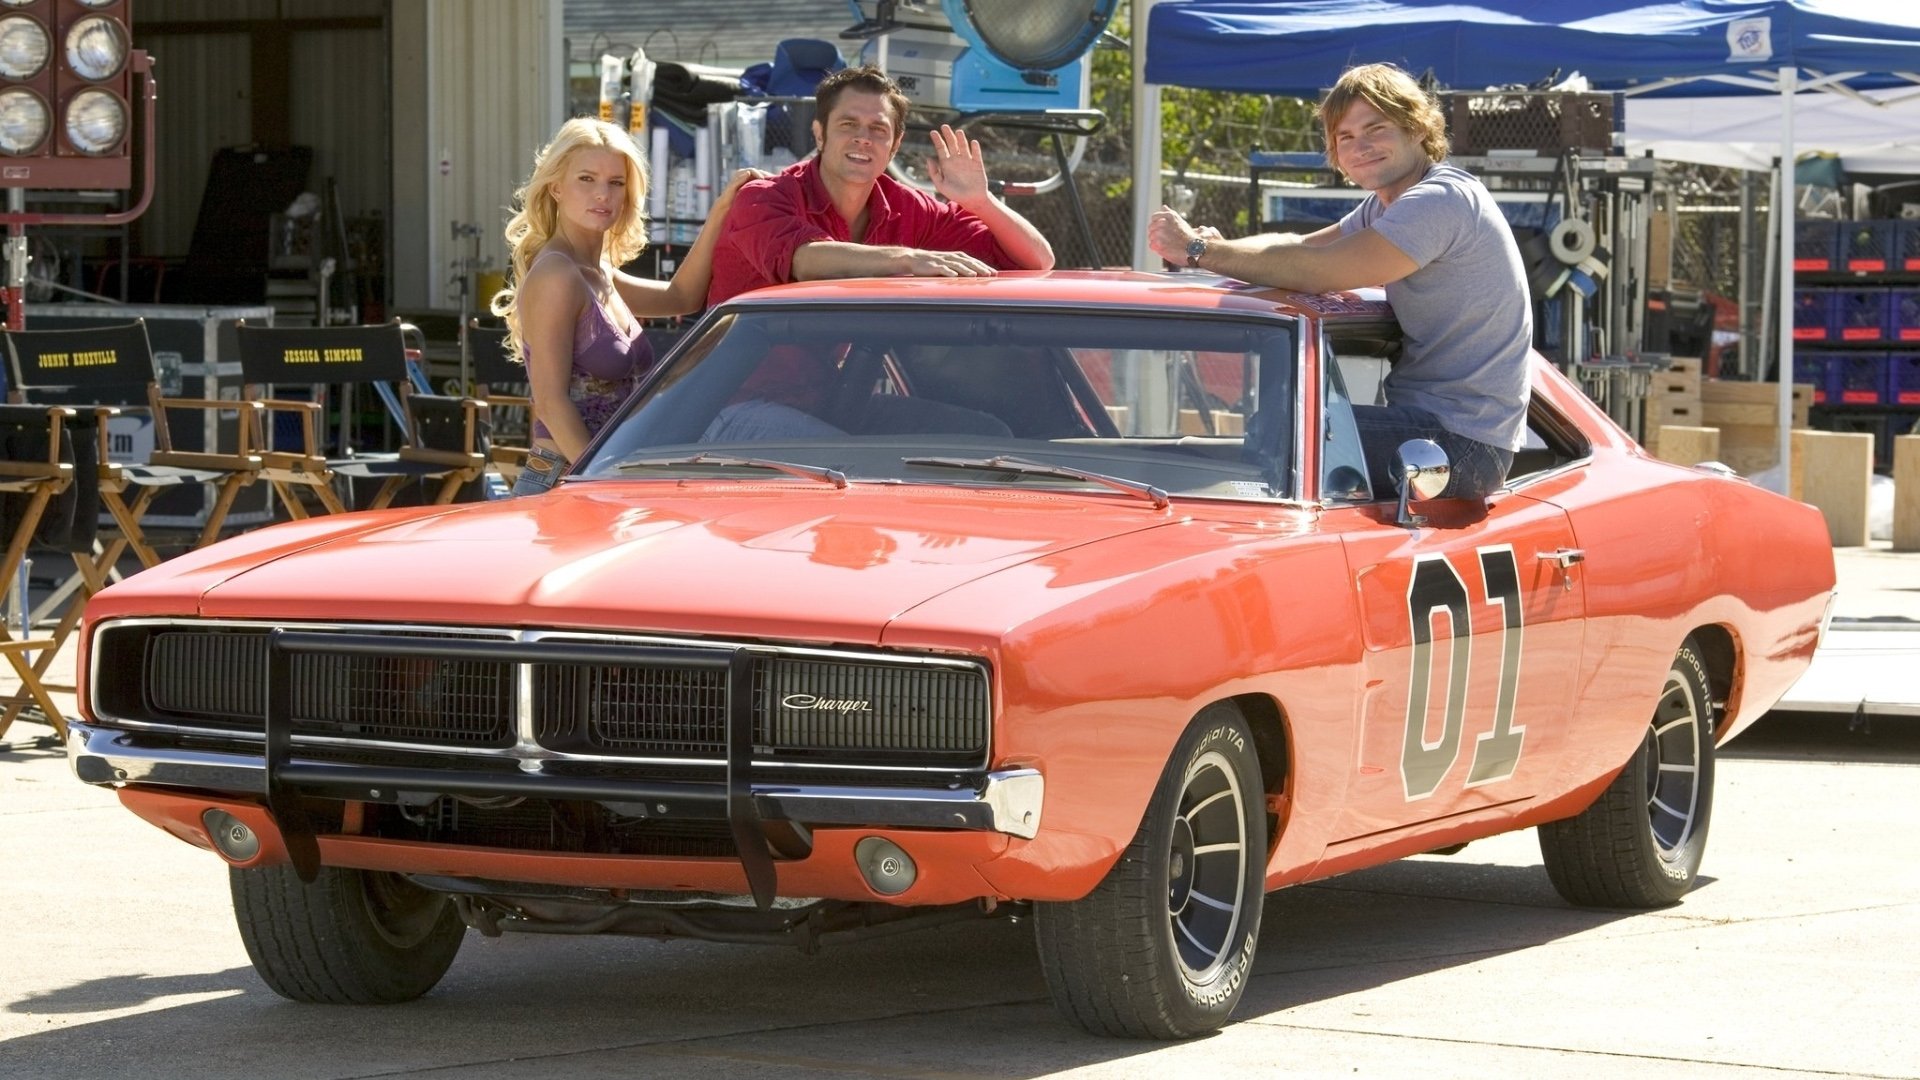 The Dukes Of Hazzard HD Wallpaper Background Image 1920x1080.